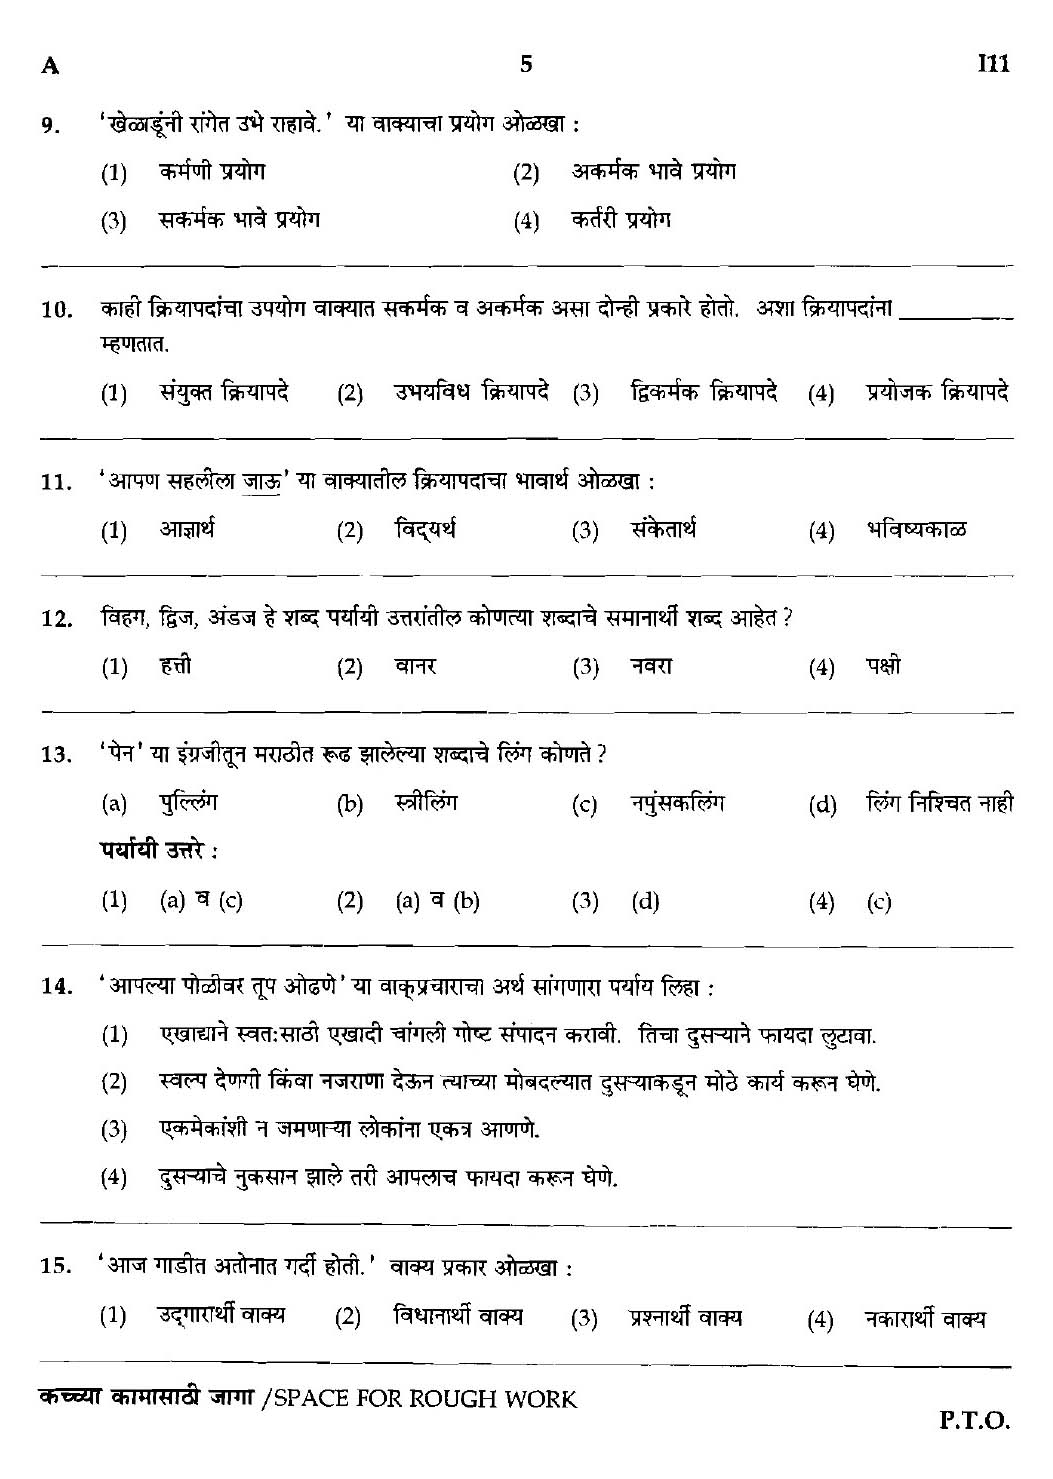 MPSC Agricultural Services Preliminary Exam 2018 Question Paper 4